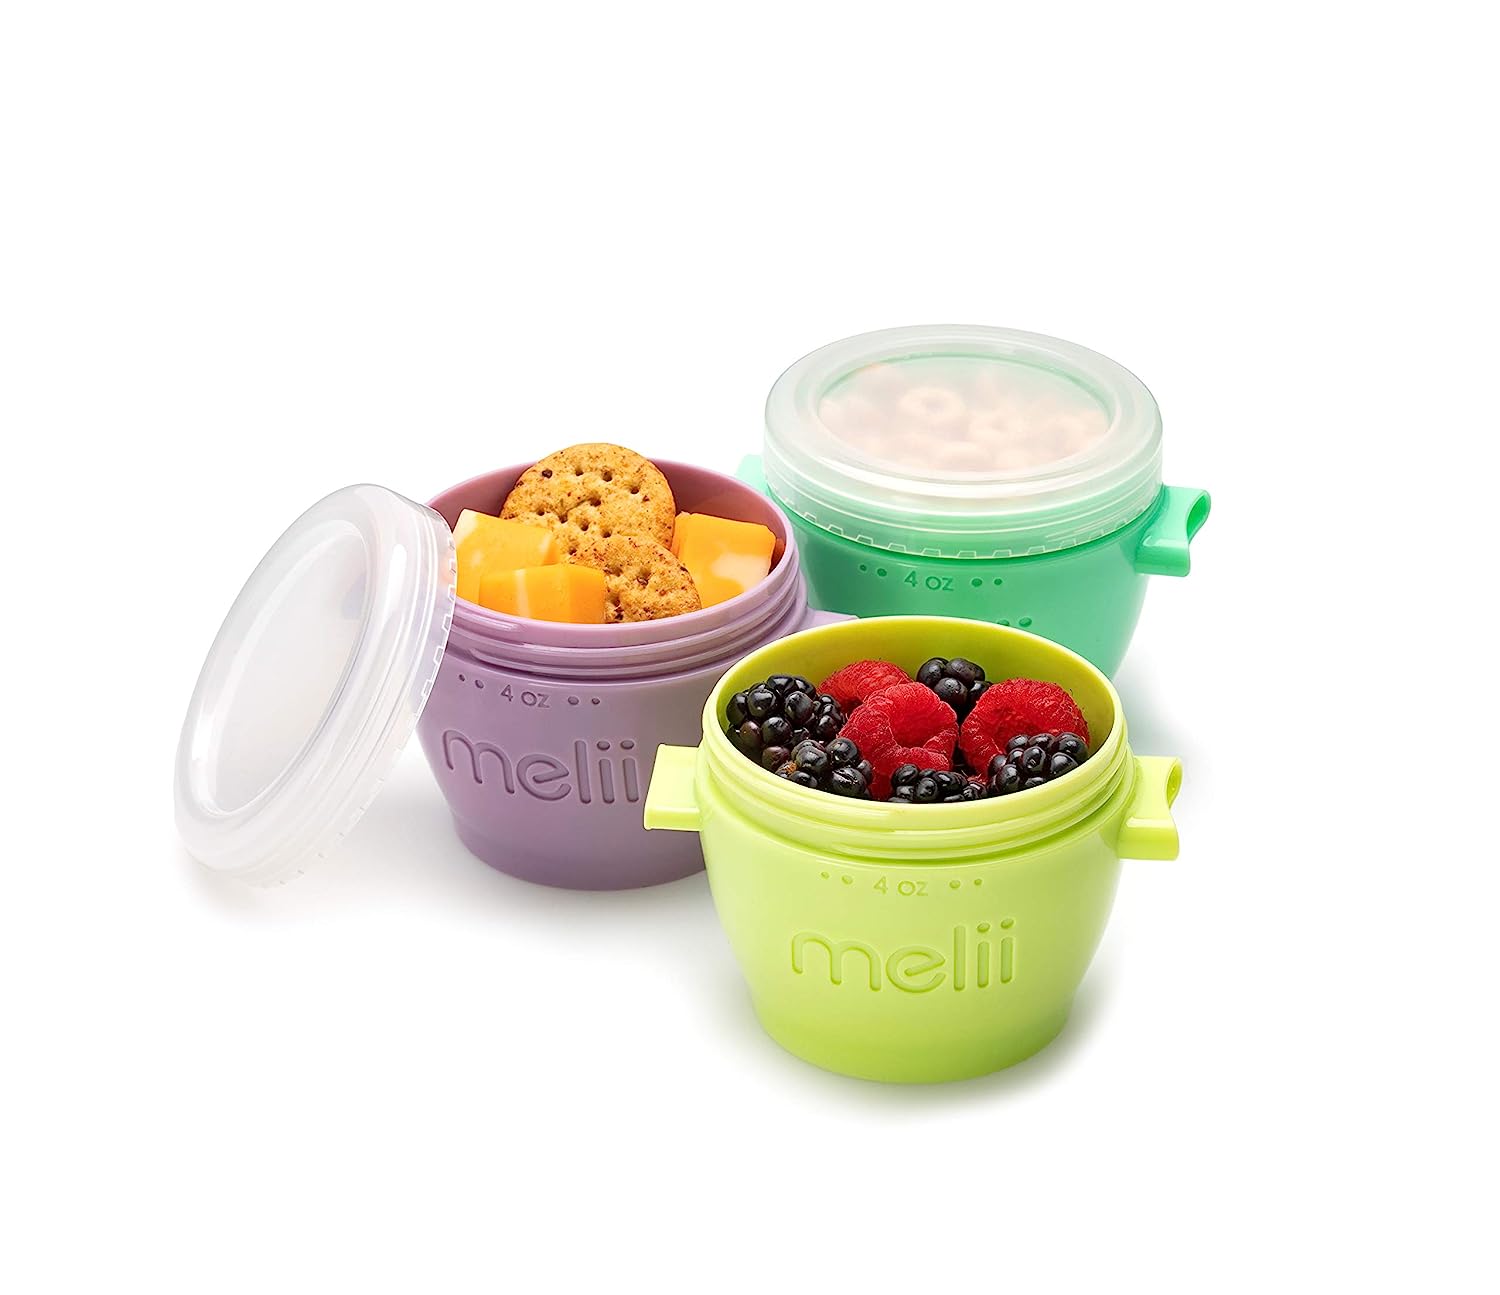 Melii Snap & Go Baby Food Storage Containers with lids, Snack Containers, Freezer safe - Set of 4, 4oz.